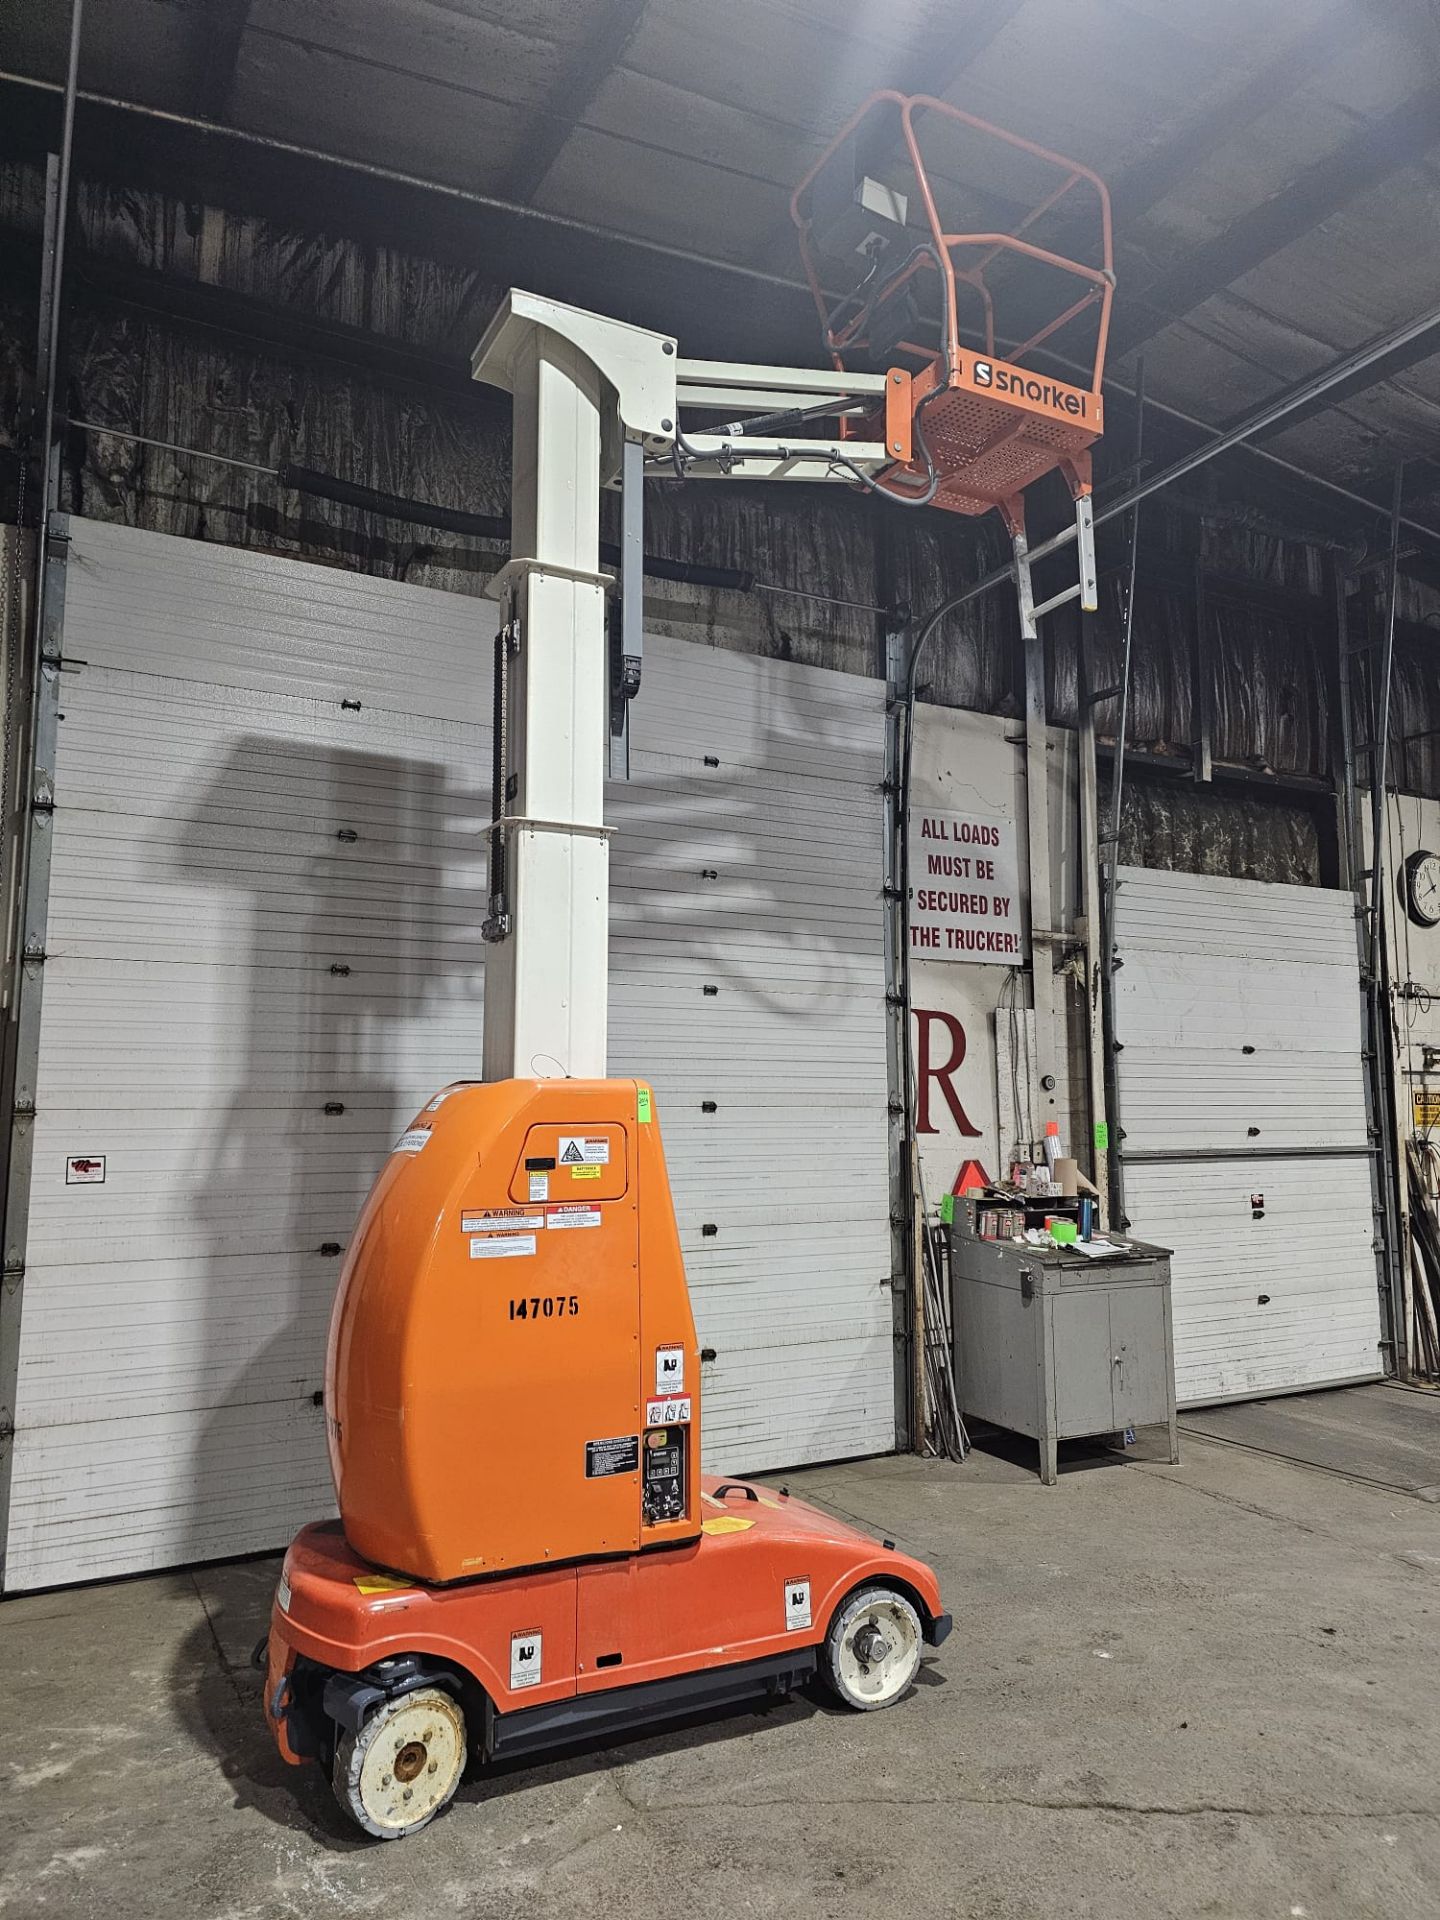 2019 Snorkel Model MB20J Mast Boom Lift Unit ManLift with 26' Working Height 24V Indoor Non- - Image 7 of 11